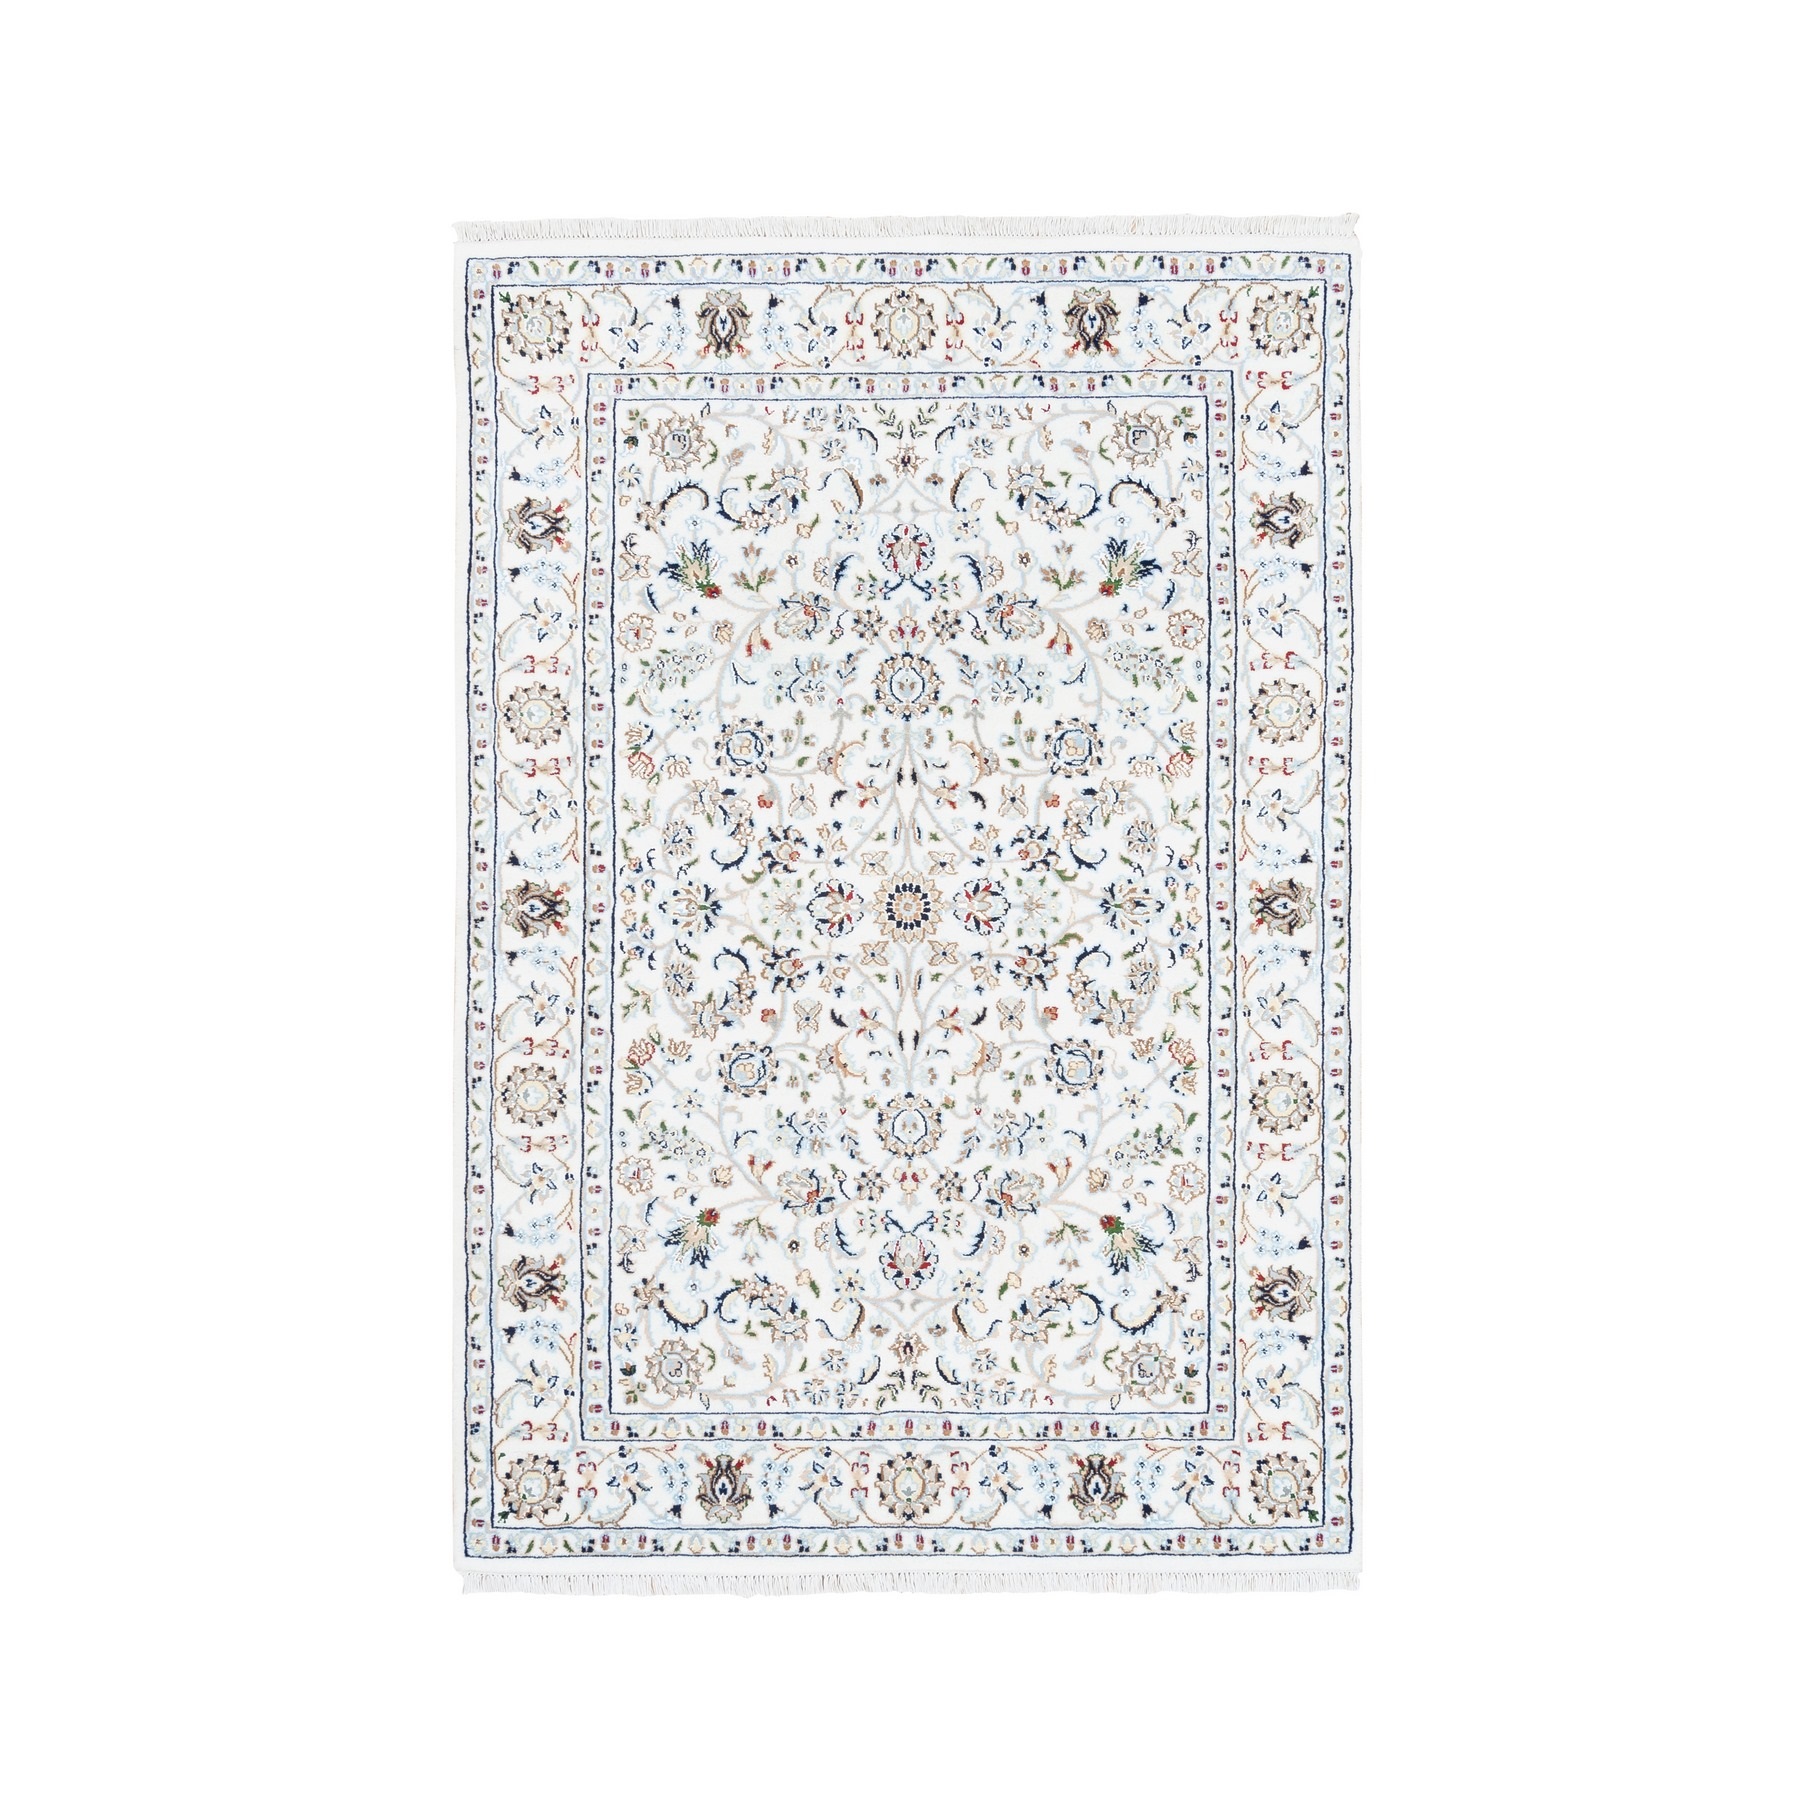 Pirniakan Collection Hand Knotted Ivory Rug No: 1125470